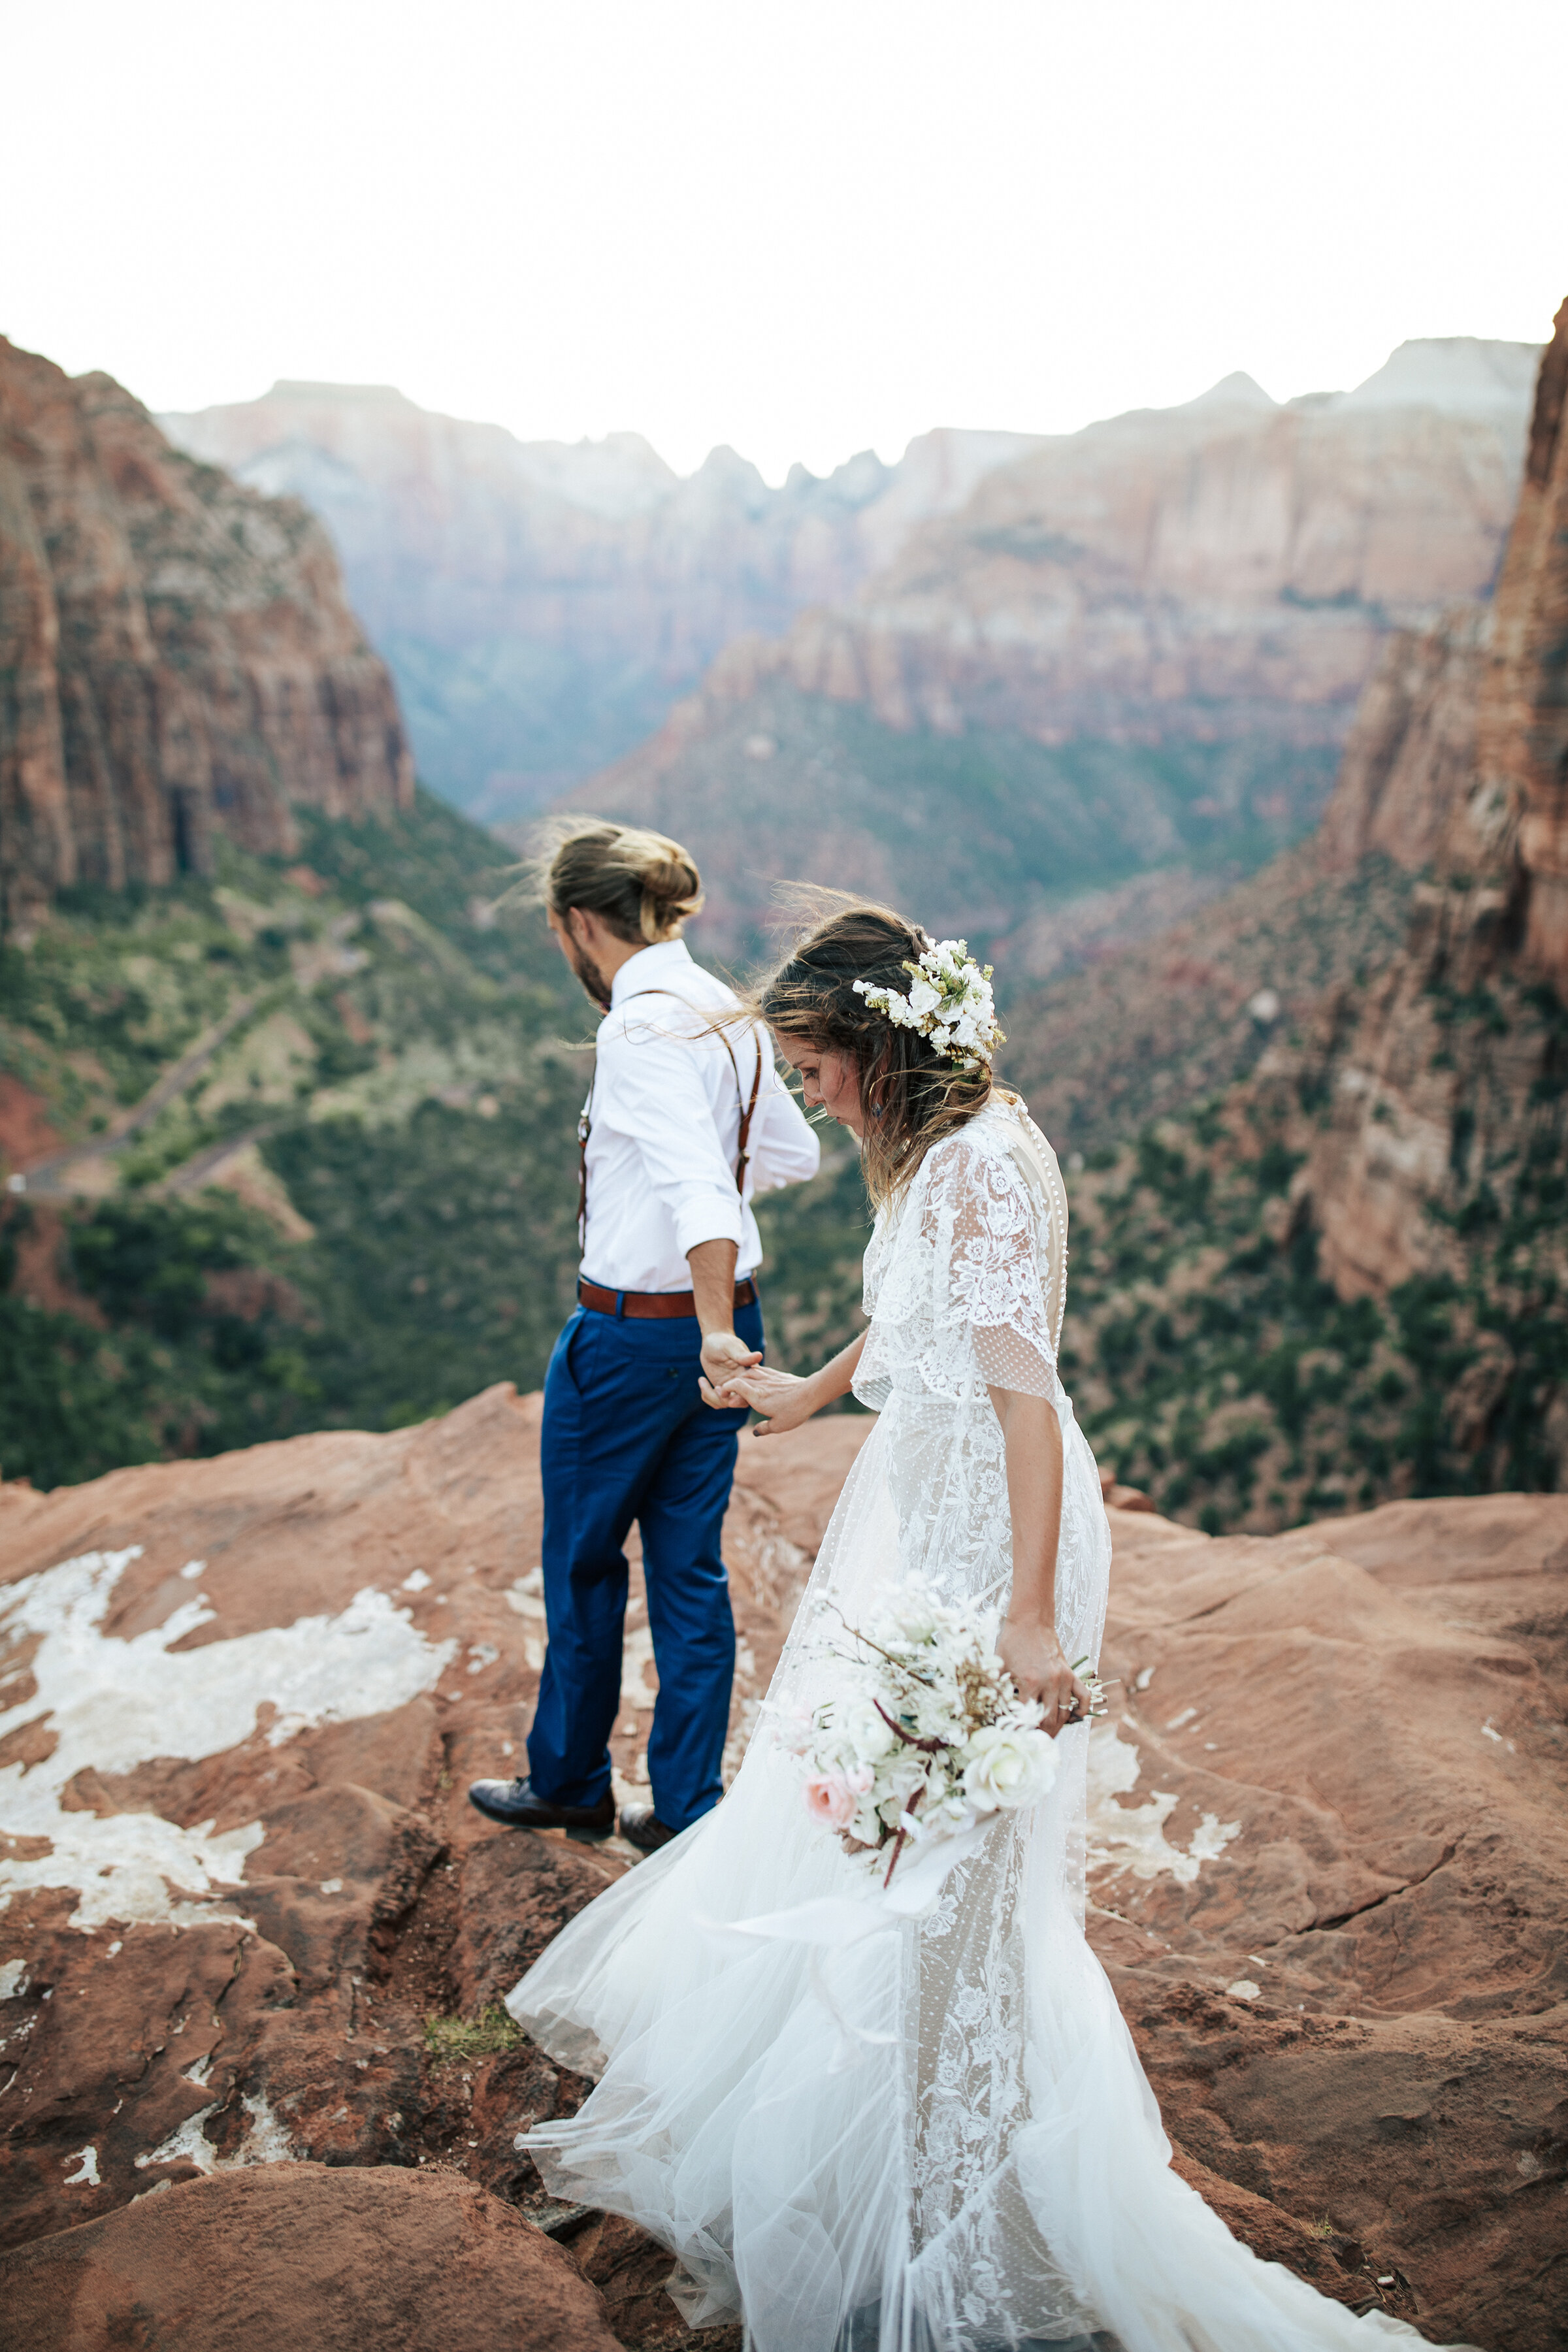  A handsome groom leads his beautiful wife along the mountains in a stunning elopement styled photo shoot in Utah by professional photographer Emily Jenkins Photography. Couple goals wedding attire inspiration for the bride bridal goals elopement att